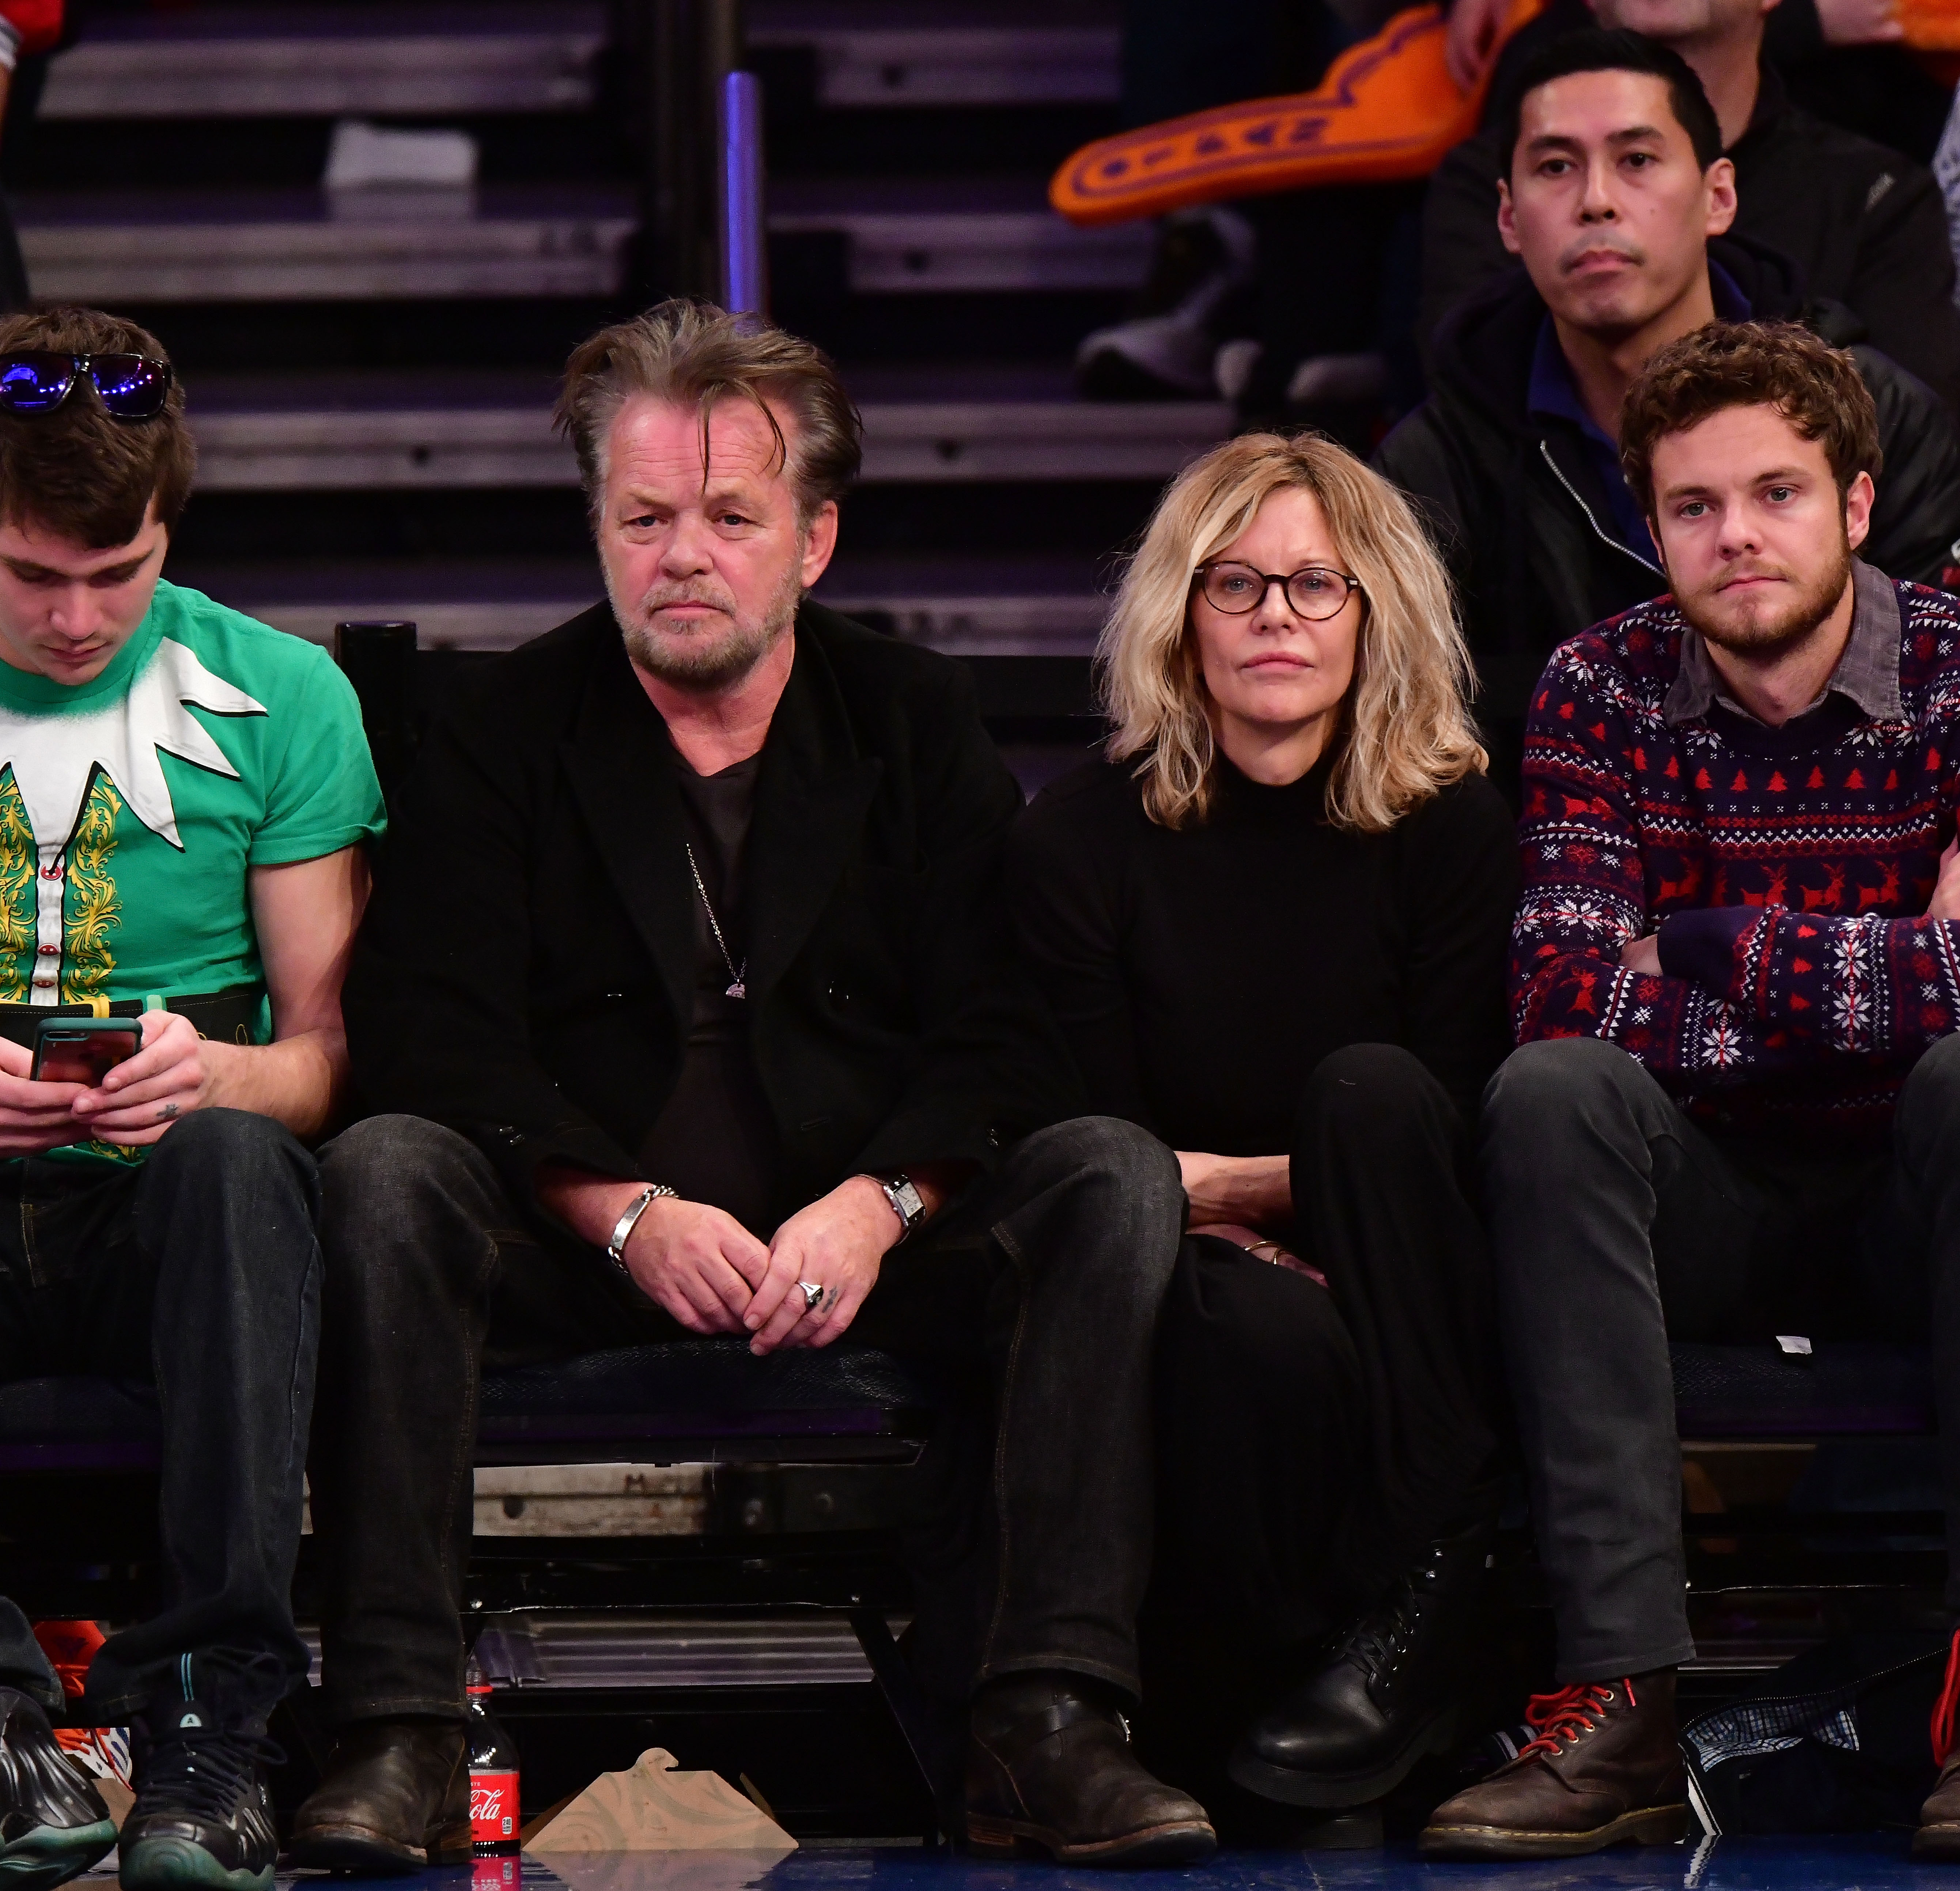 John Mellencamp, Meg Ryan, and Jack Quaid at a game at Madison Square Garden on December 25, 2017, in New York City | Source: Getty Images